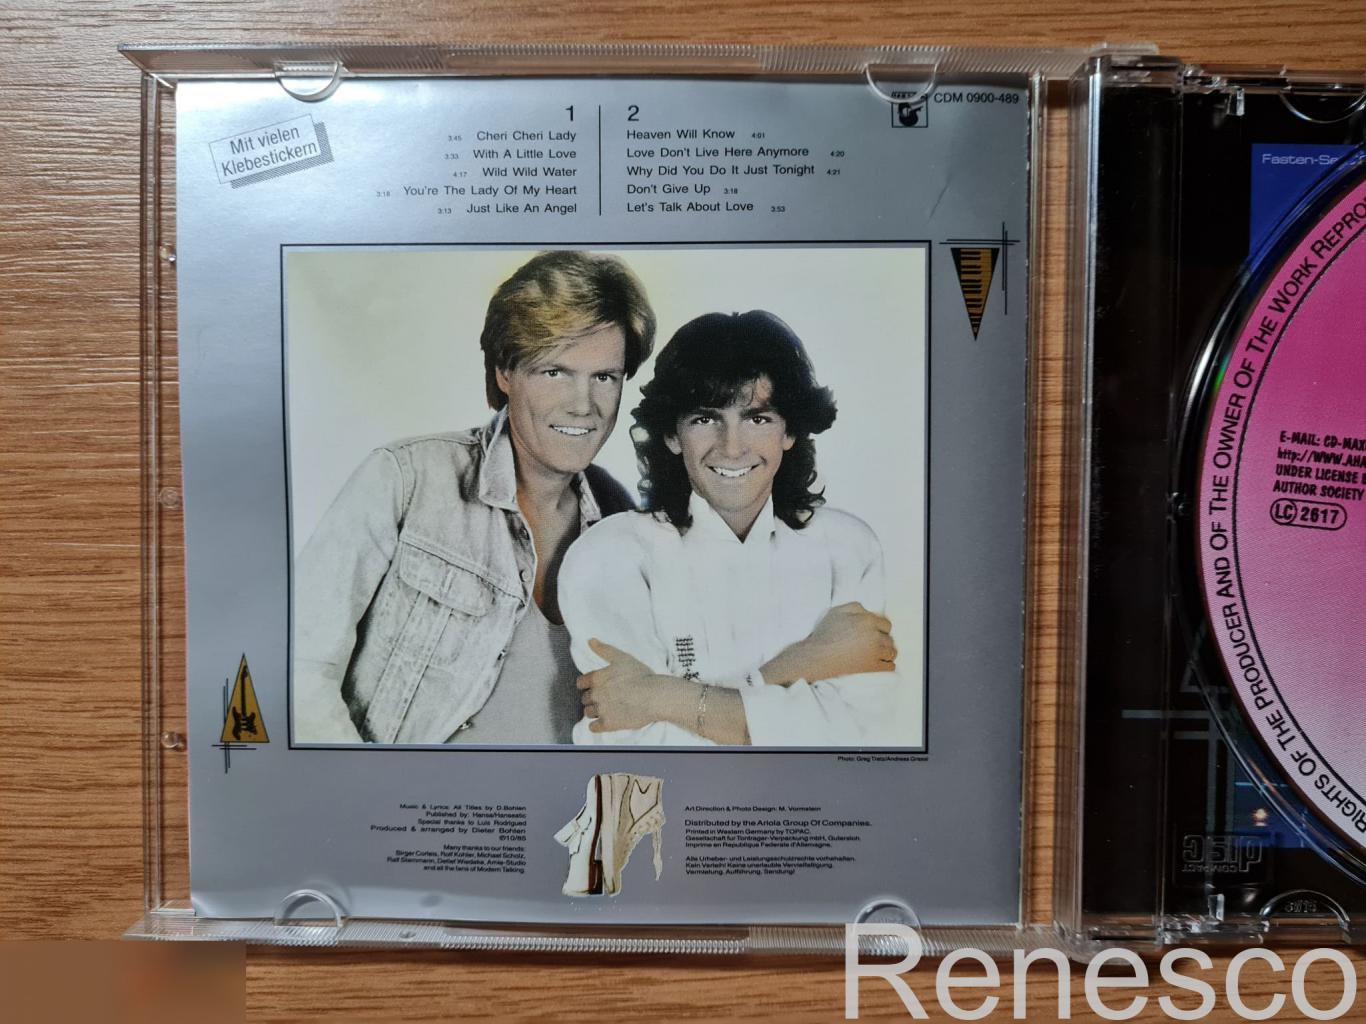 Modern Talking ?– Let's Talk About Love / Romantic Warriors (Russia) (2000) (Uno 3